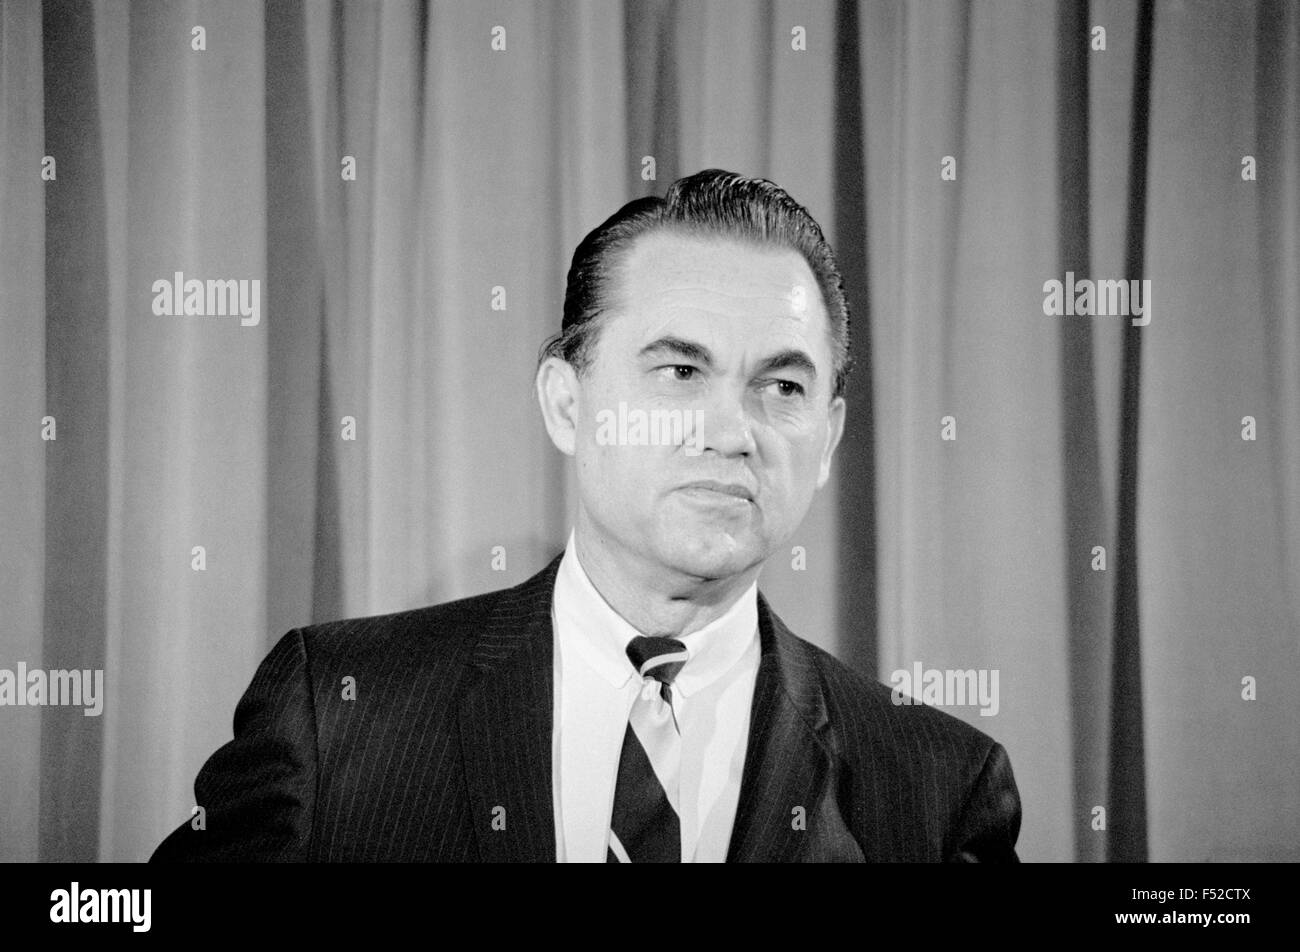 Former Alabama Governor George Wallace during a news conference announcing his campaign for the presidency as a 3rd party candidate February 8, 1968 in Washington, DC. Stock Photo